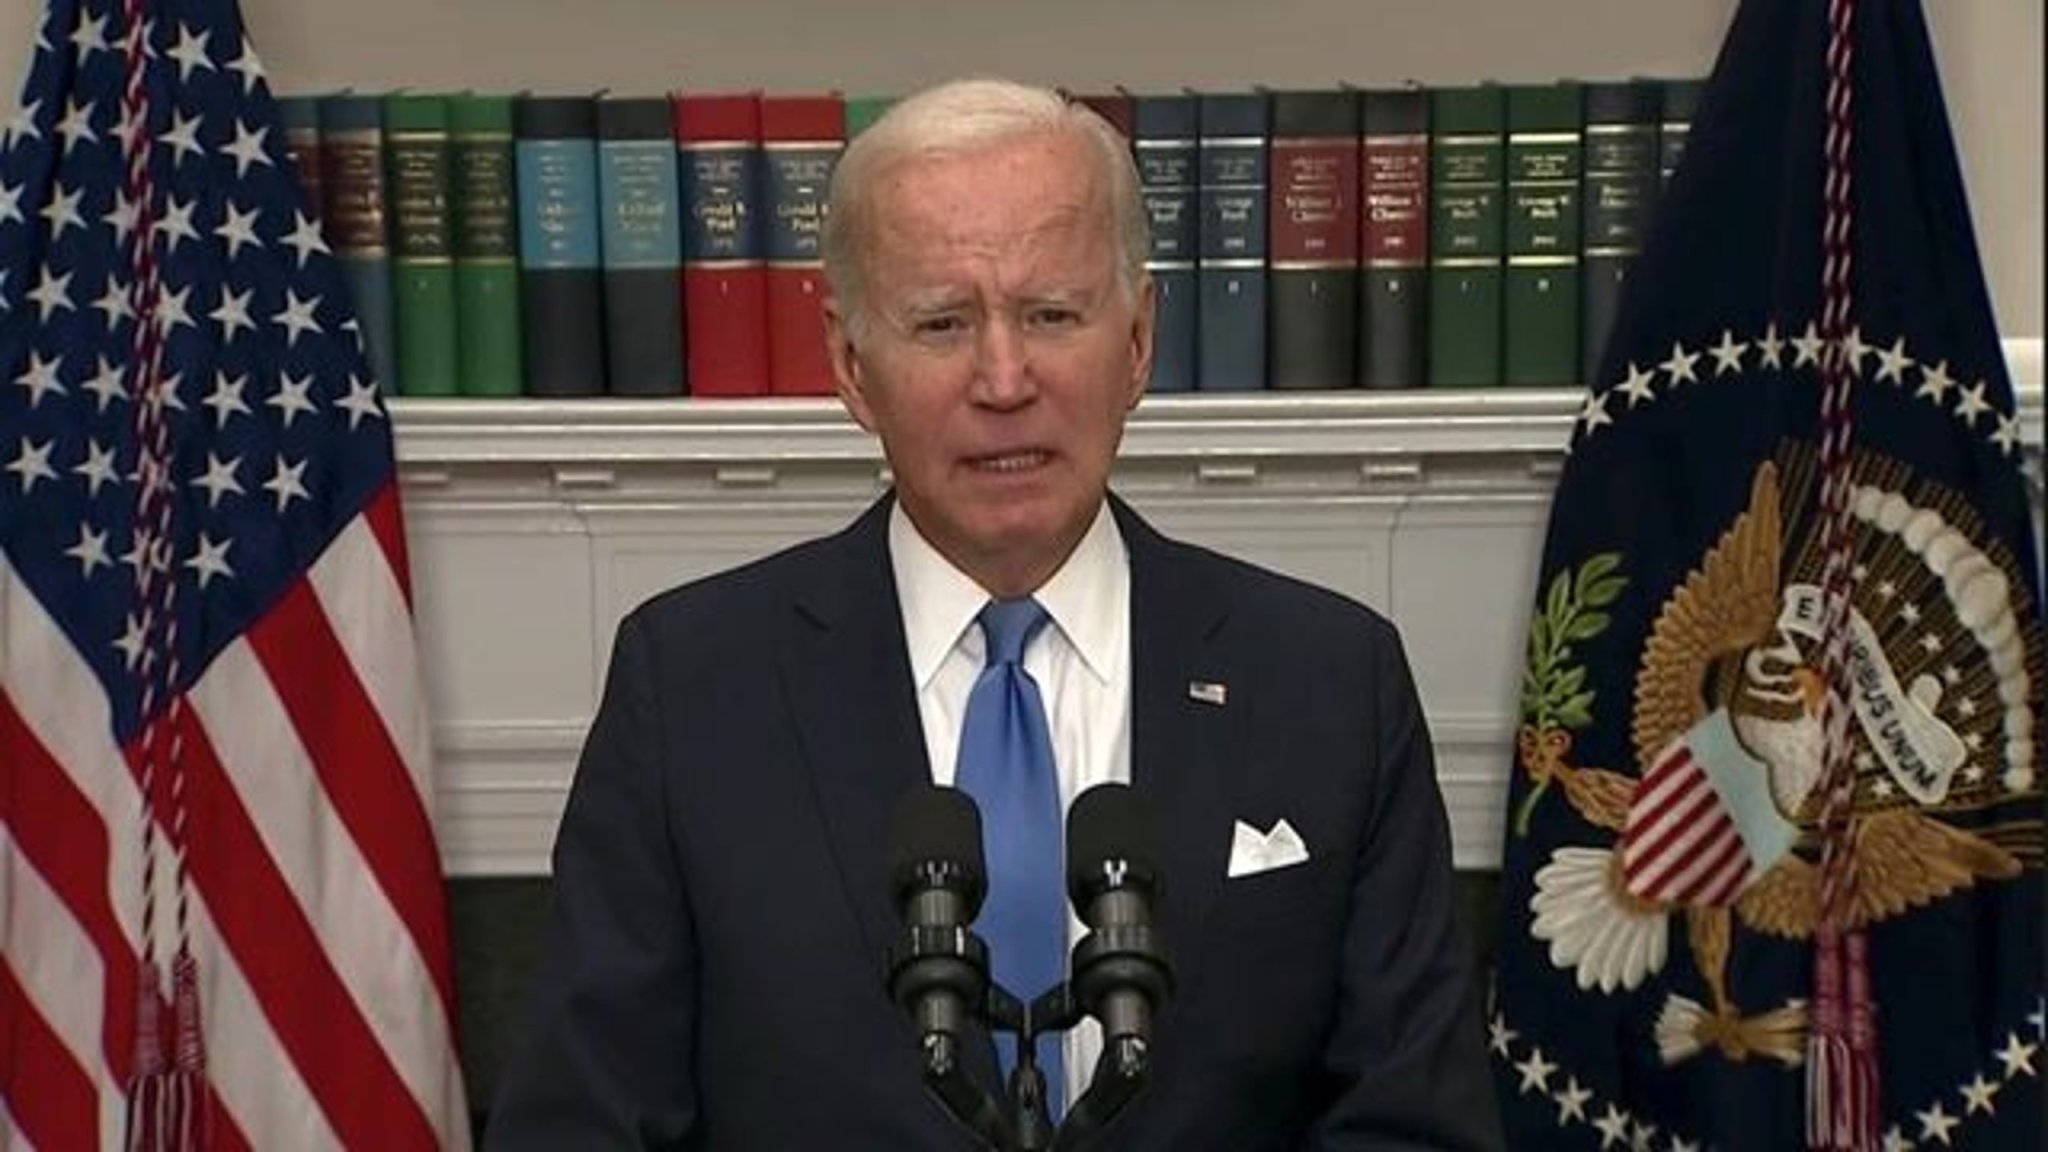 President Biden says he approved the request “right away” for an emergency declaration in South Carolina.